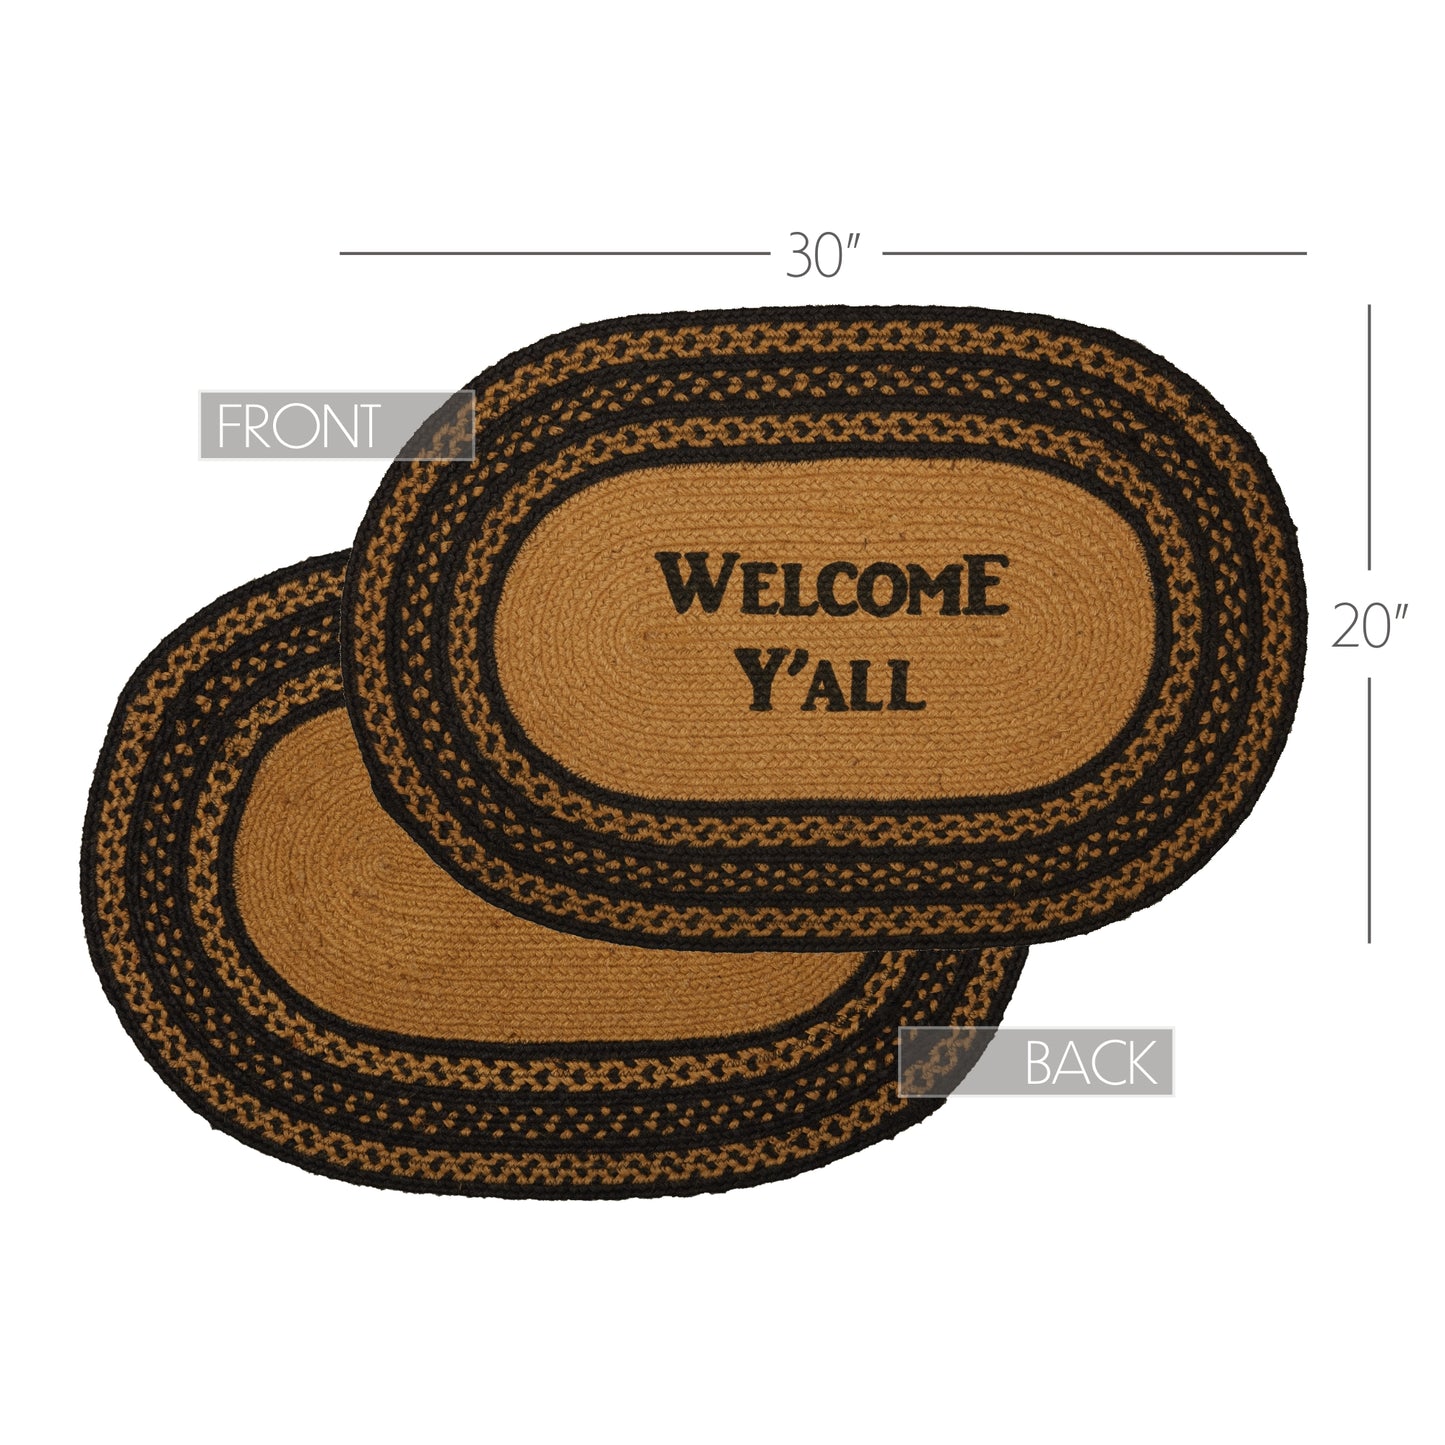 69787-Farmhouse-Jute-Rug-Oval-Stencil-Welcome-Y-all-w-Pad-20x30-image-6